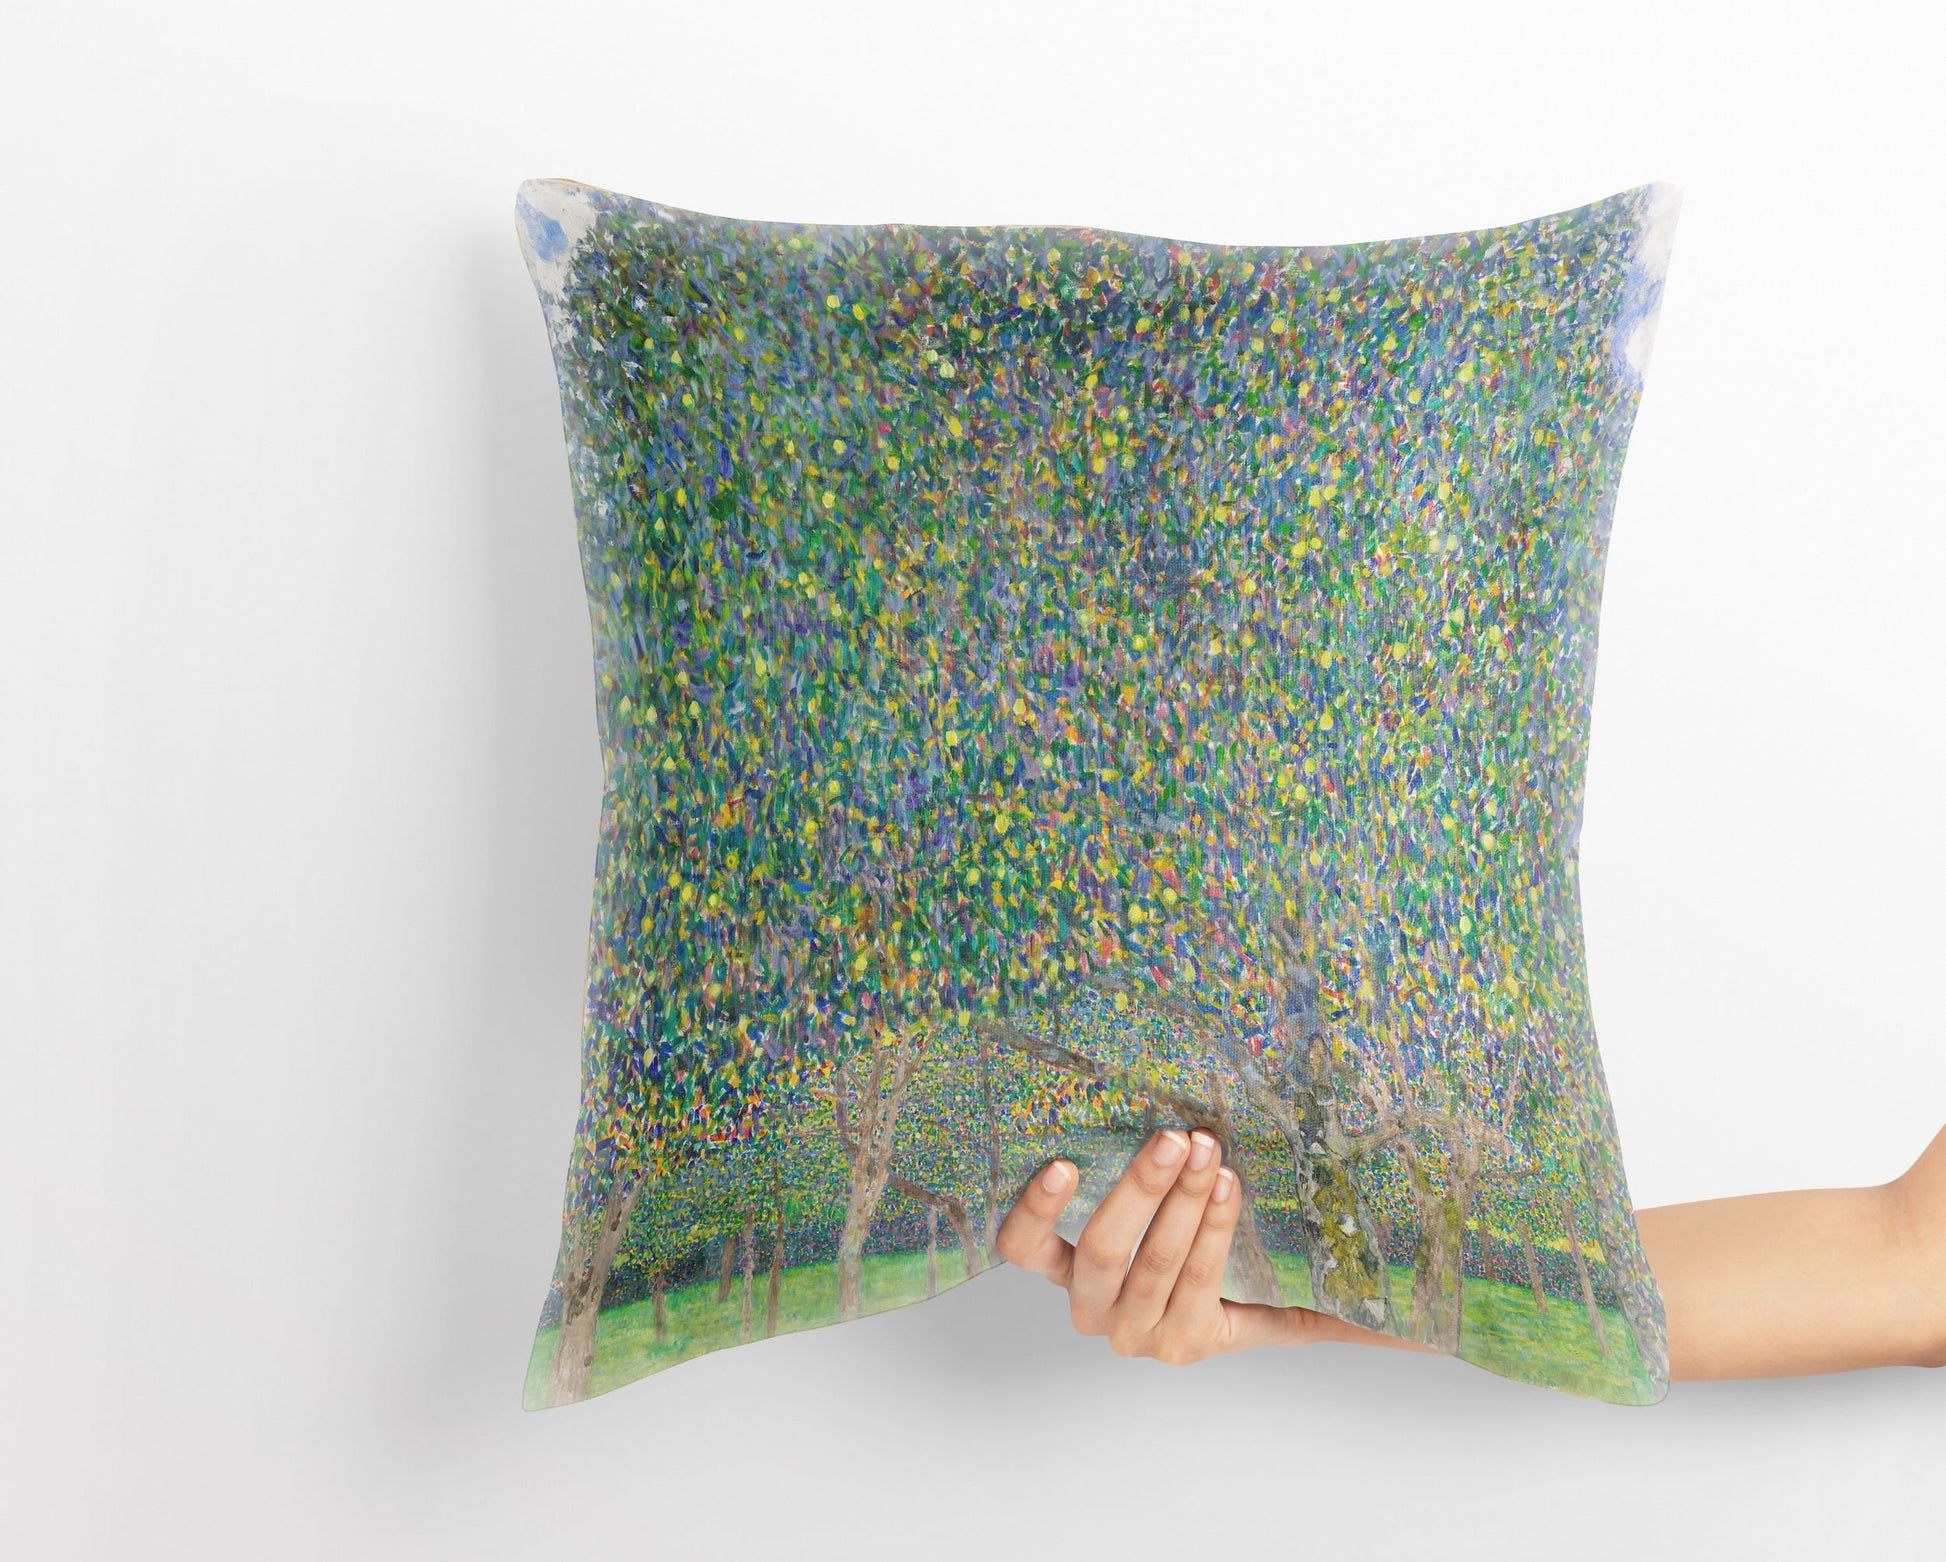 Gustav Klimt Famous Painting Pear Tree, Pillow Case, Abstract Pillow, Soft Pillow Cases, 22X22 Pillow Cover, Housewarming Gift, Sofa Pillows